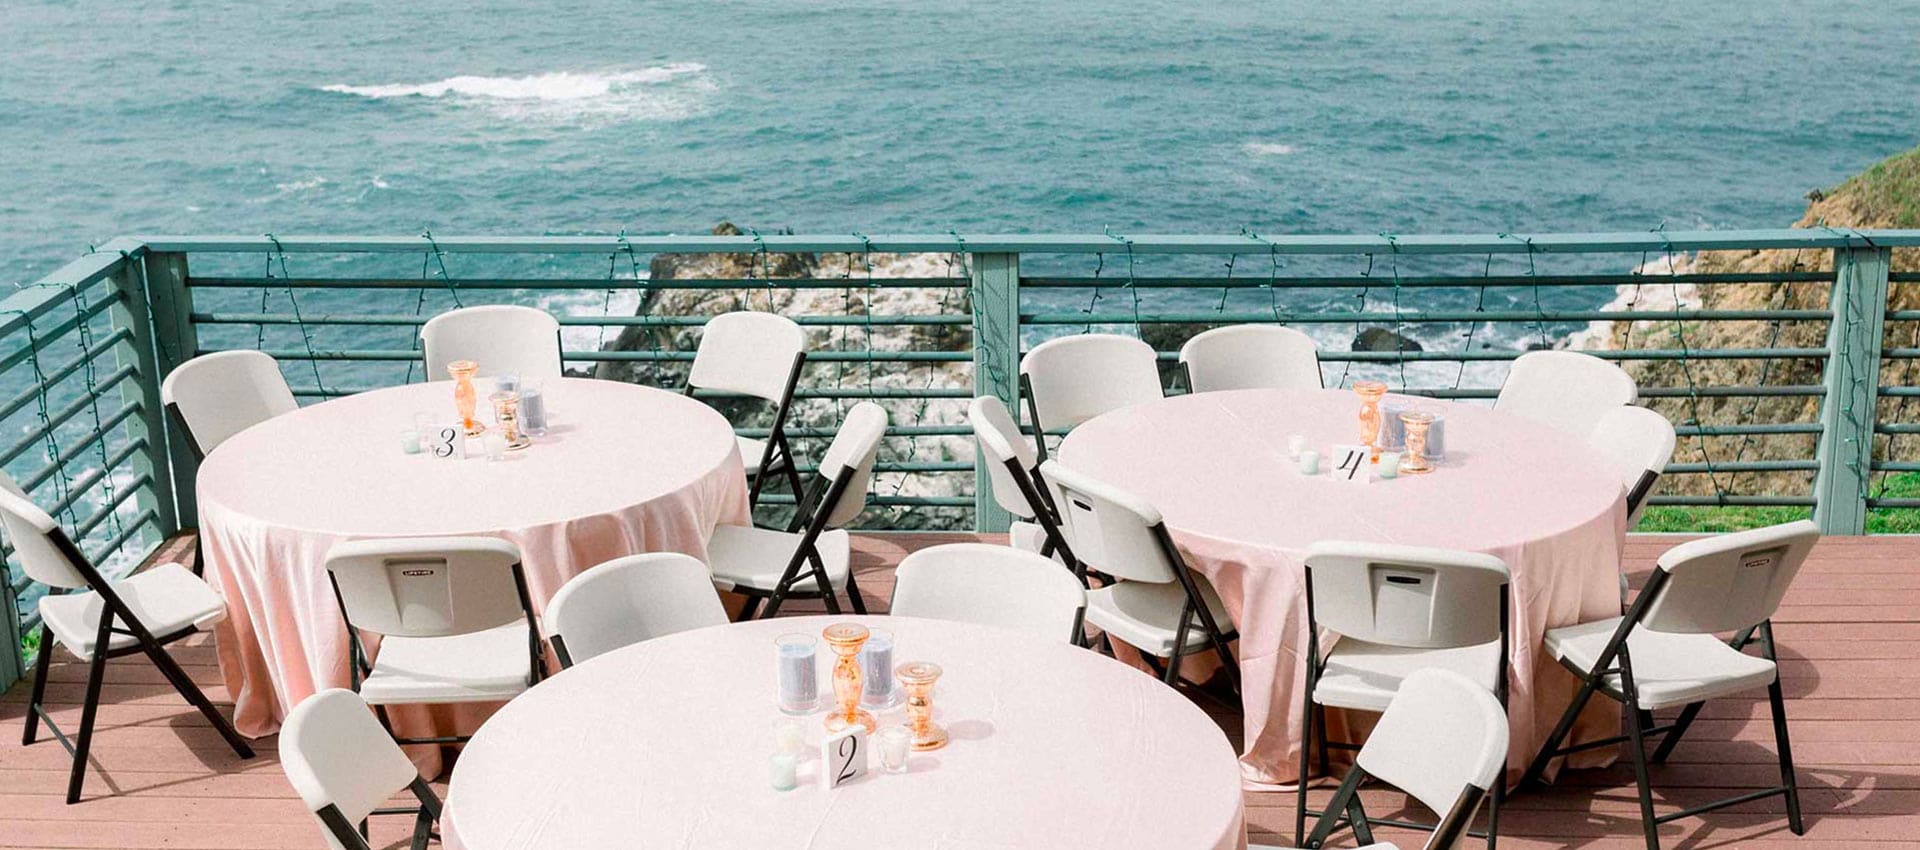 Weddings and Events in Shelter Cove, California